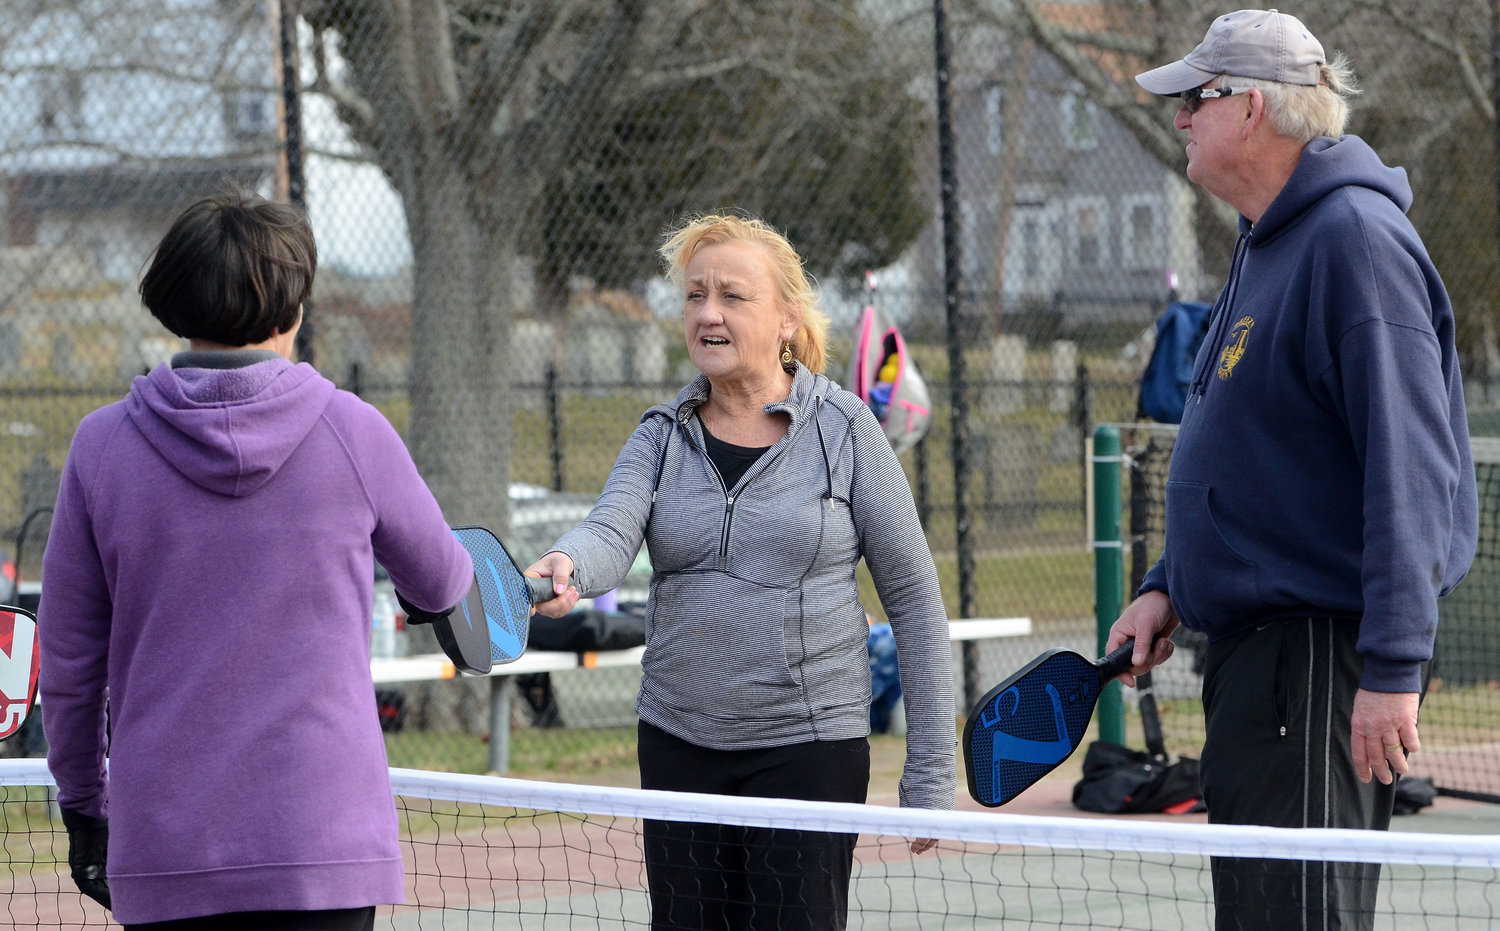 Eileen Malloy, Cathy Winston, David Schwartz and Peter Maloney (not in picture) touch racquets after the match. 